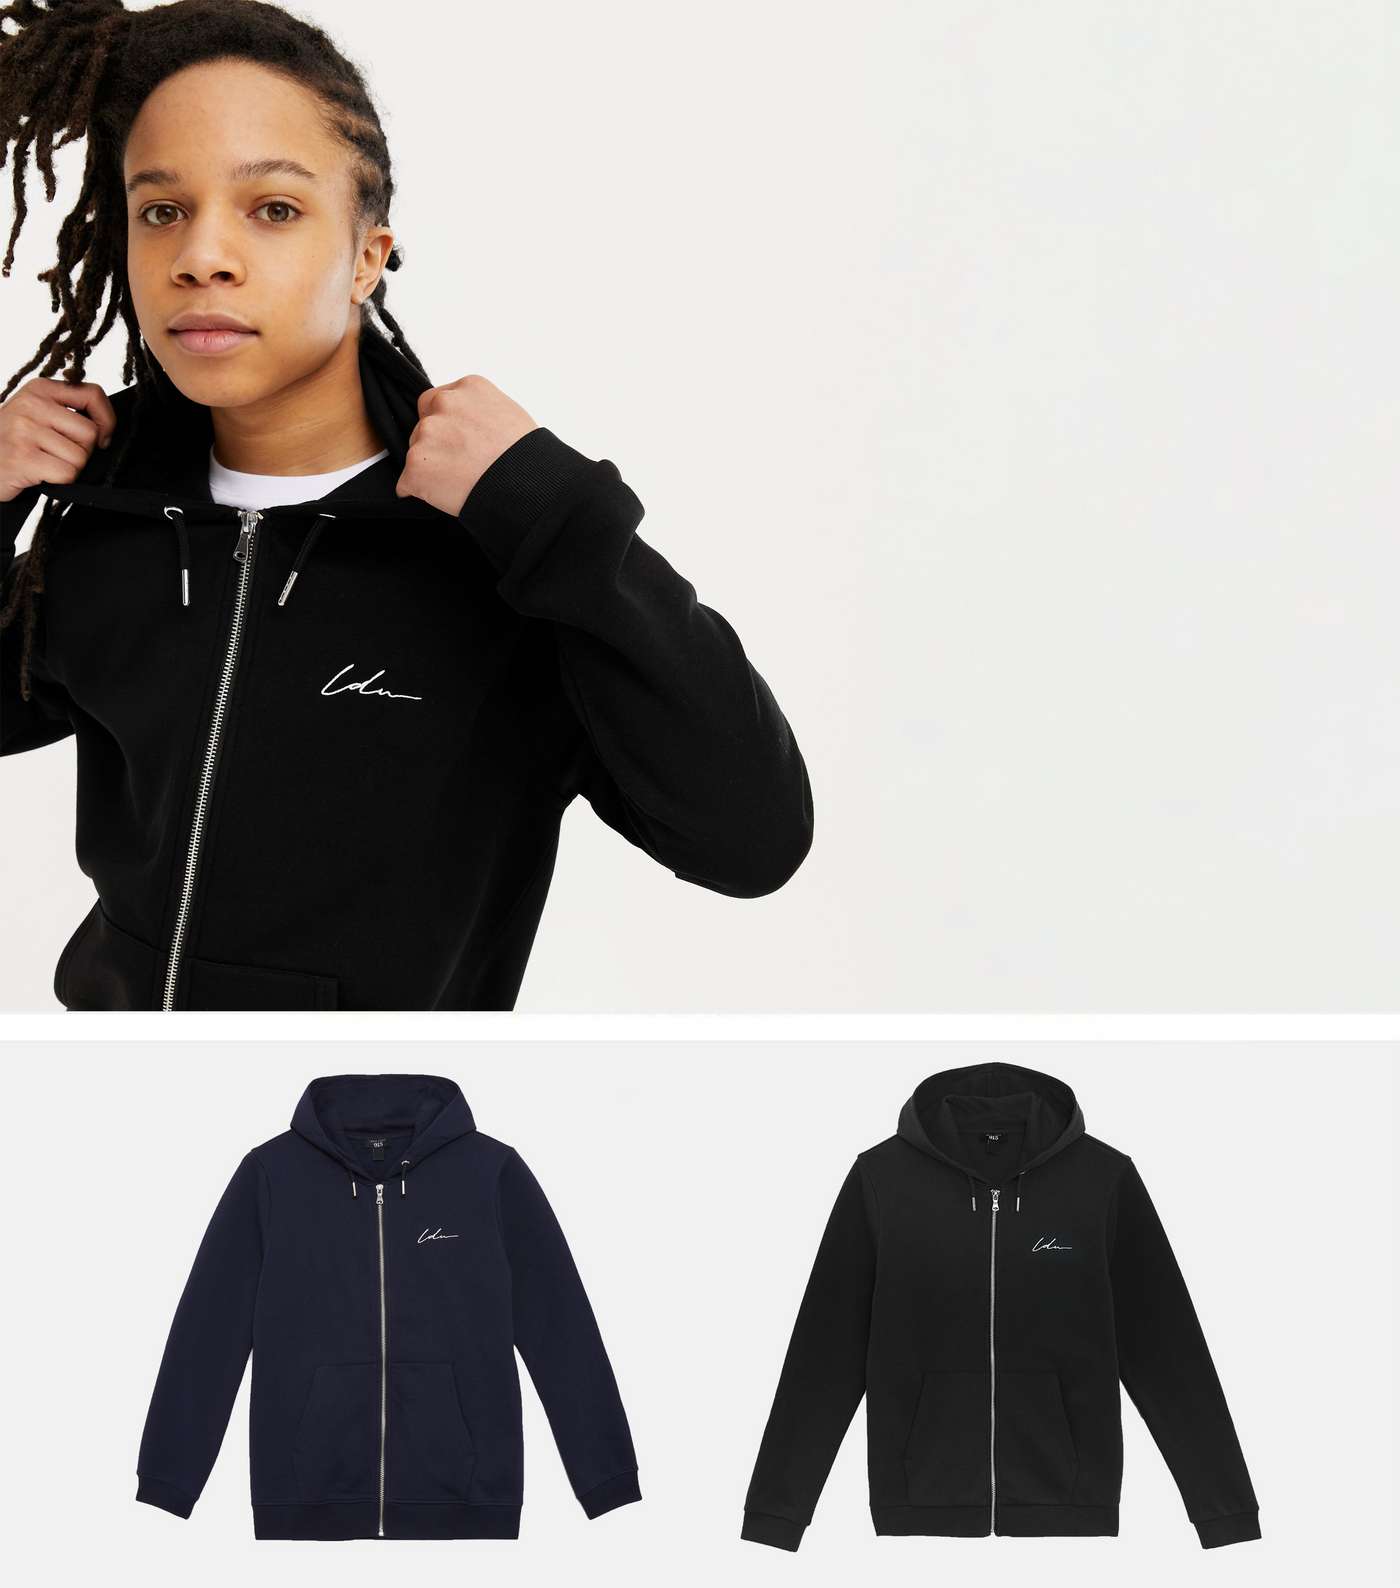 Boys 2 Pack Black and Navy Embroidered Zip Hoodies